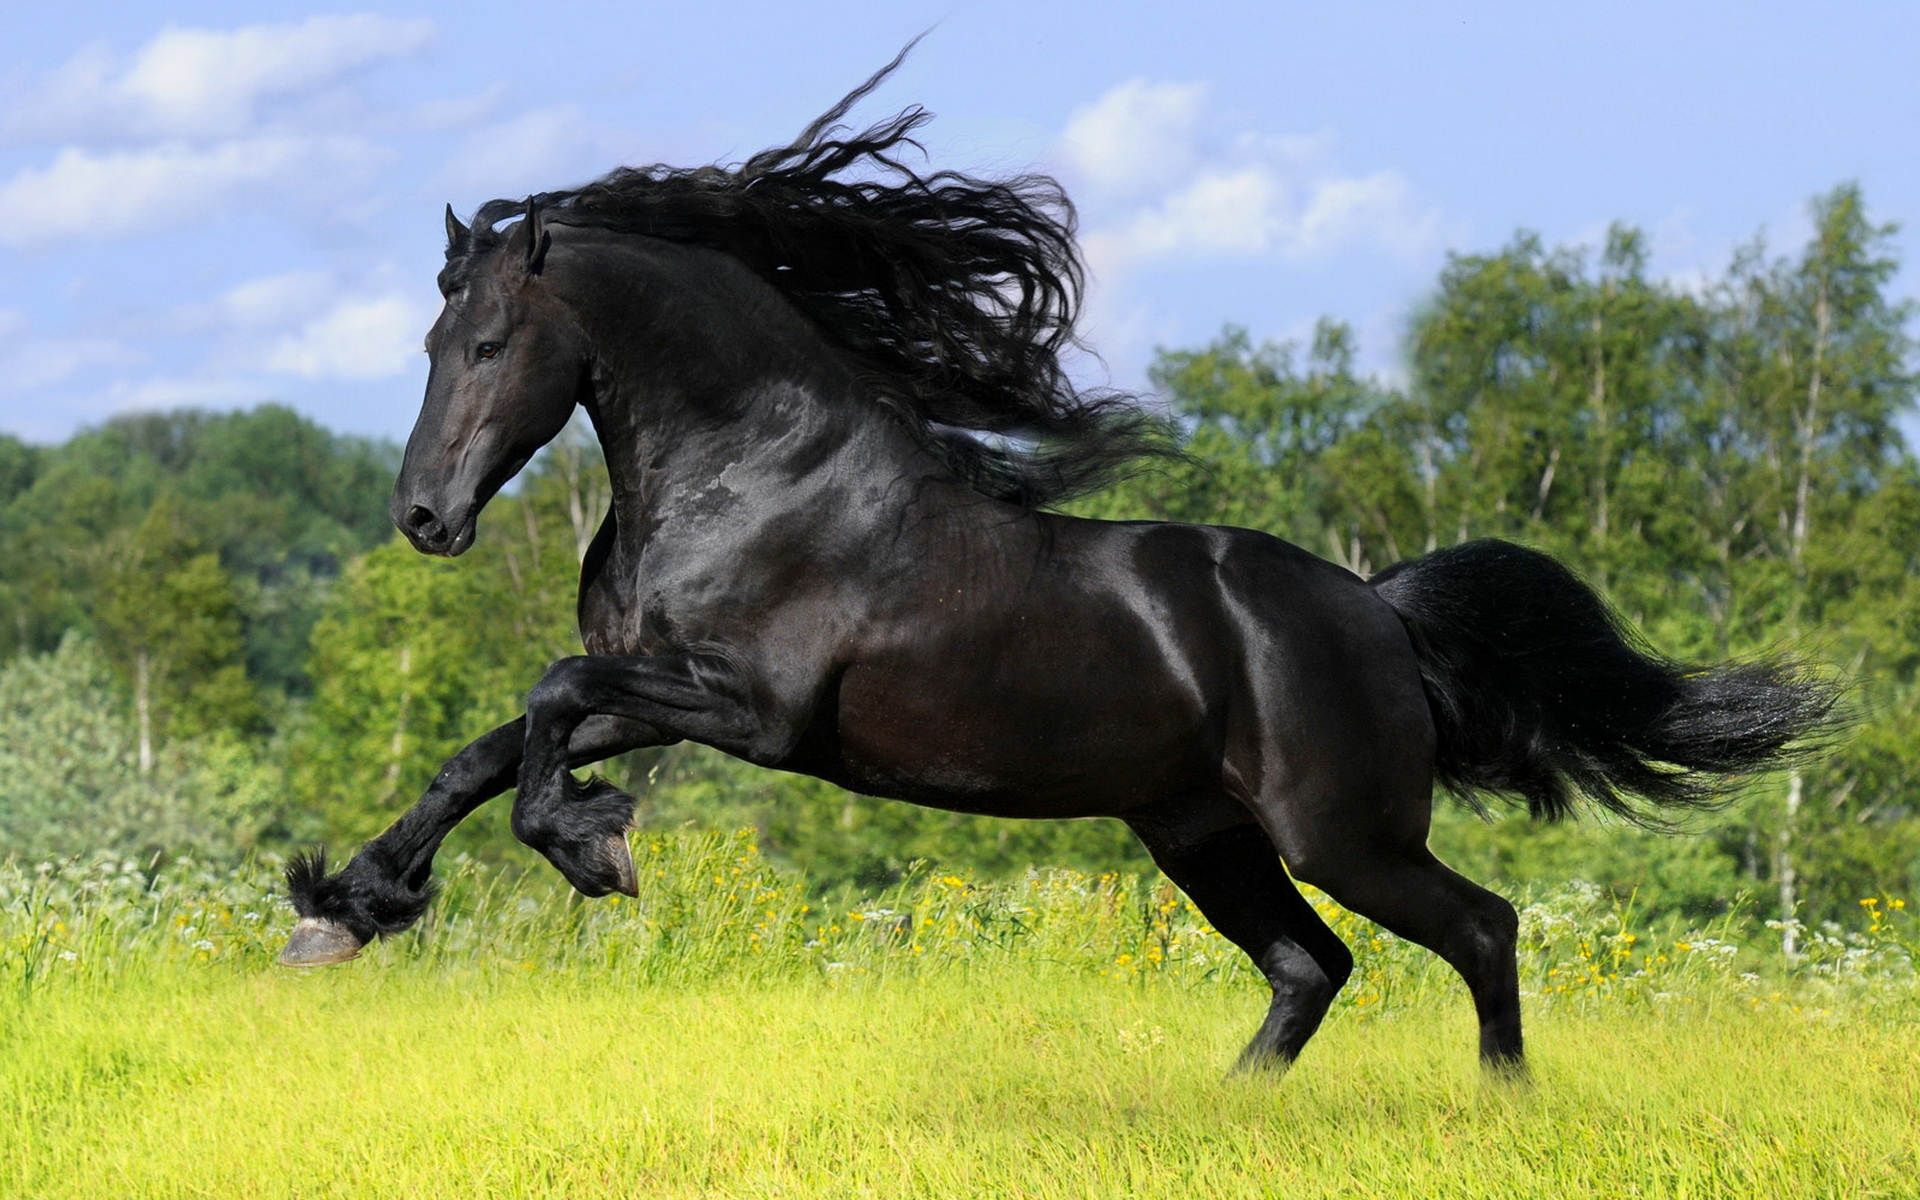 Black Horse Wallpaper And Image Pictures Photos